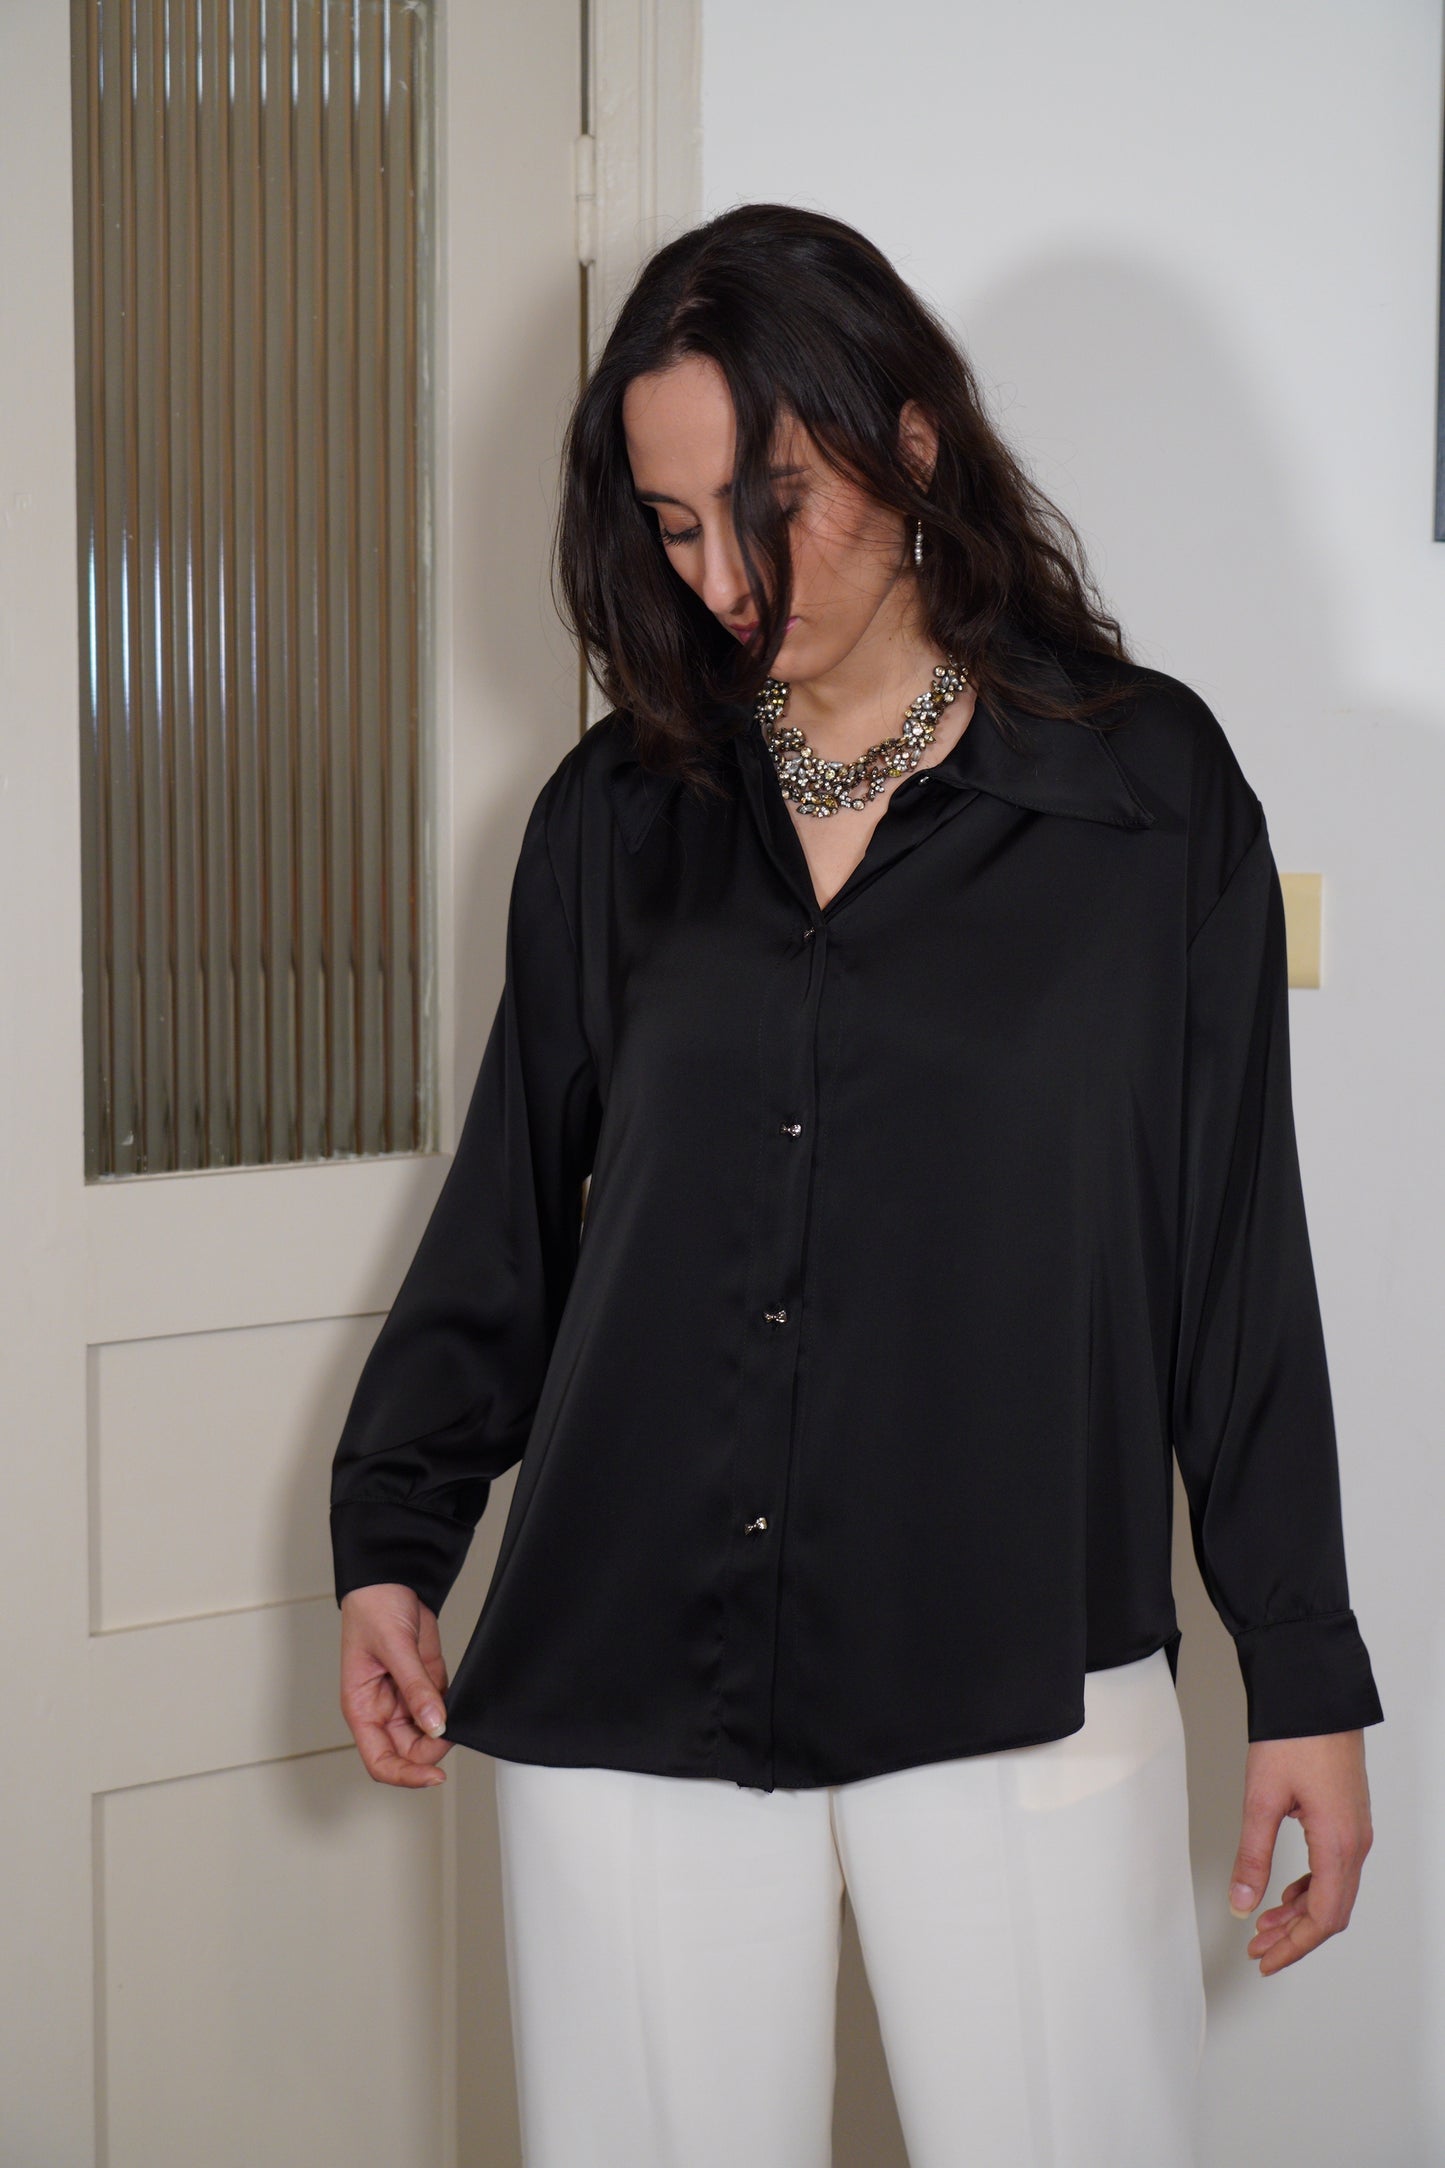 The Satin Button-up in Black